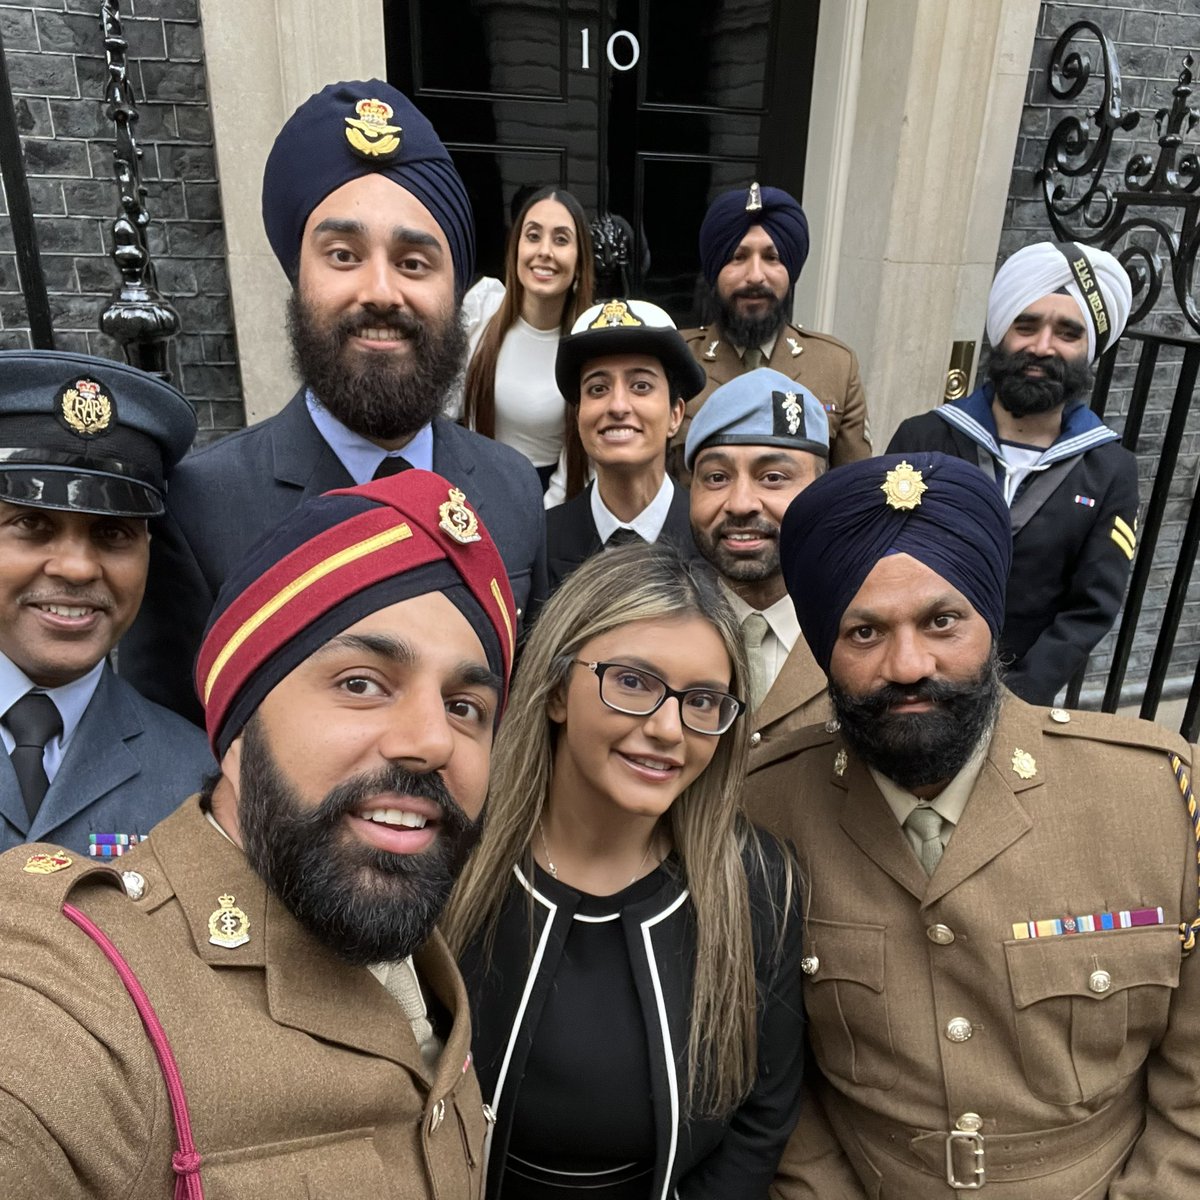 No ordinary job, was great to join the @DefenceSikhNW at the Vaisakhi at No 10. Sikhs play crucial roles across UK society, from business to the armed forces, thankful as always to call this my home 🇬🇧 #britisharmy #sikh #British